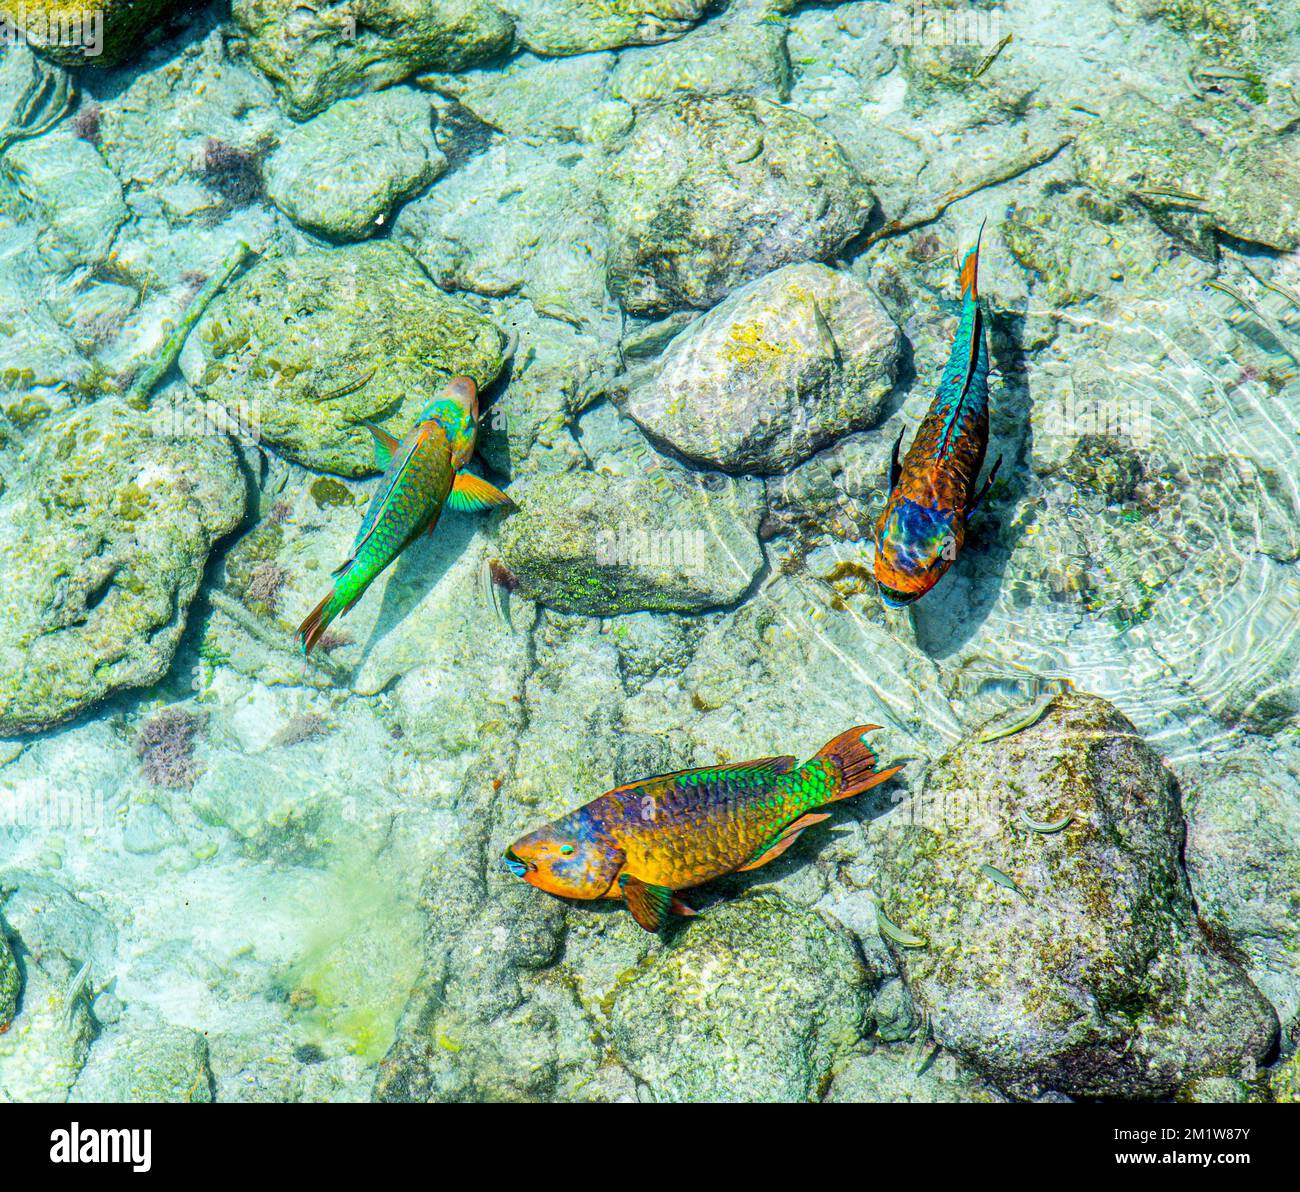 3 Parrot Fish in the Sargasso Sea Stock Photo